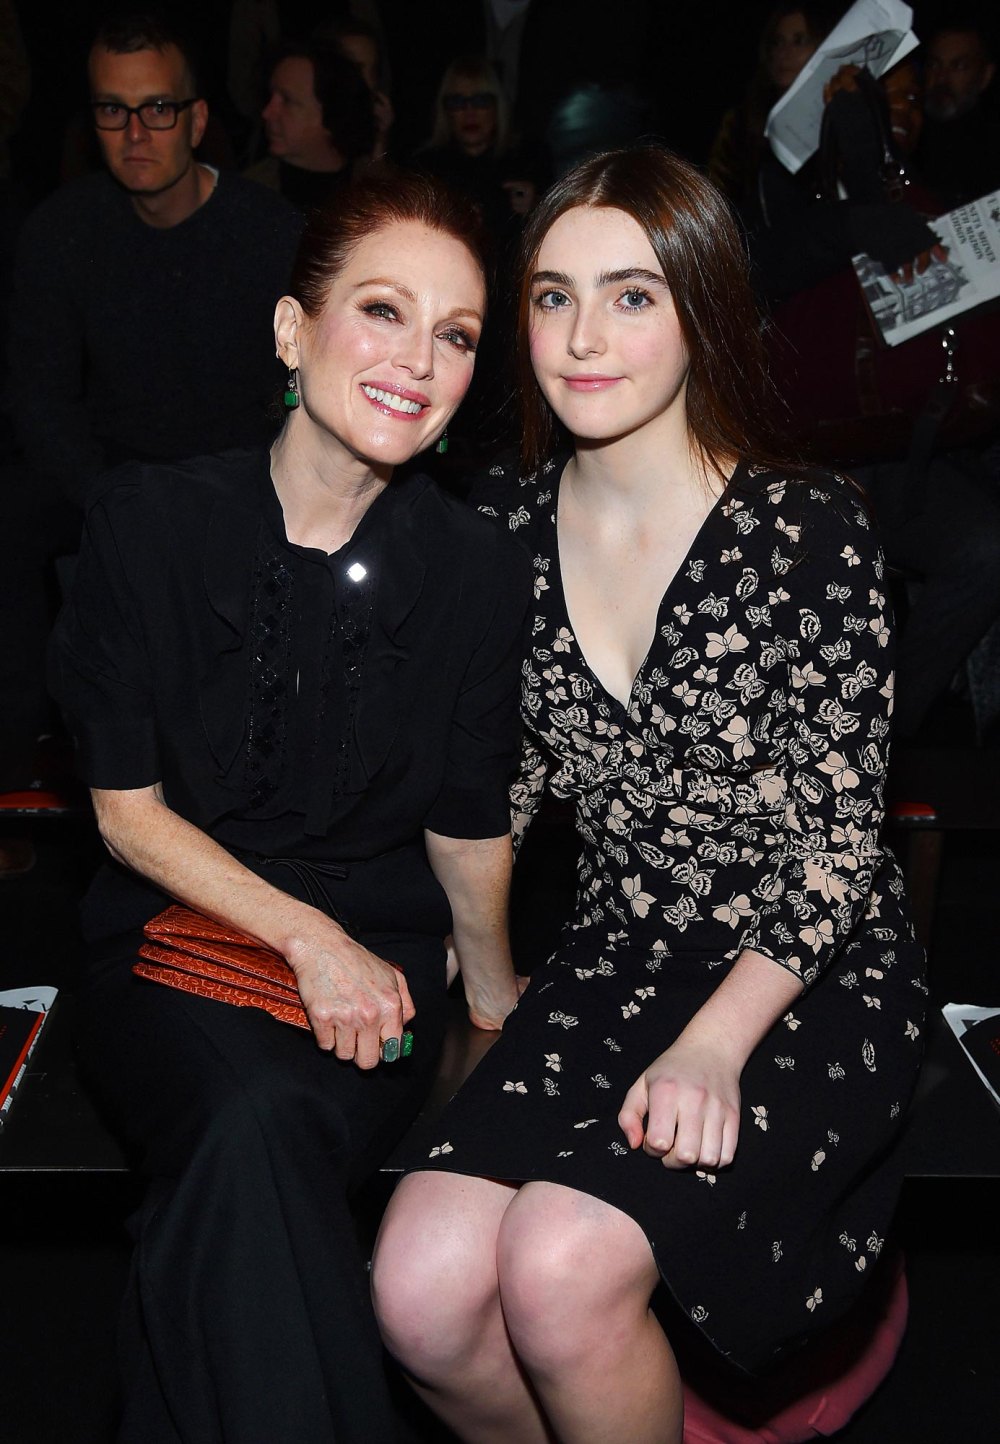 Julianne Moore Shares Rare Photo of Look alike Daughter Liv on Her 22nd Birthday 431